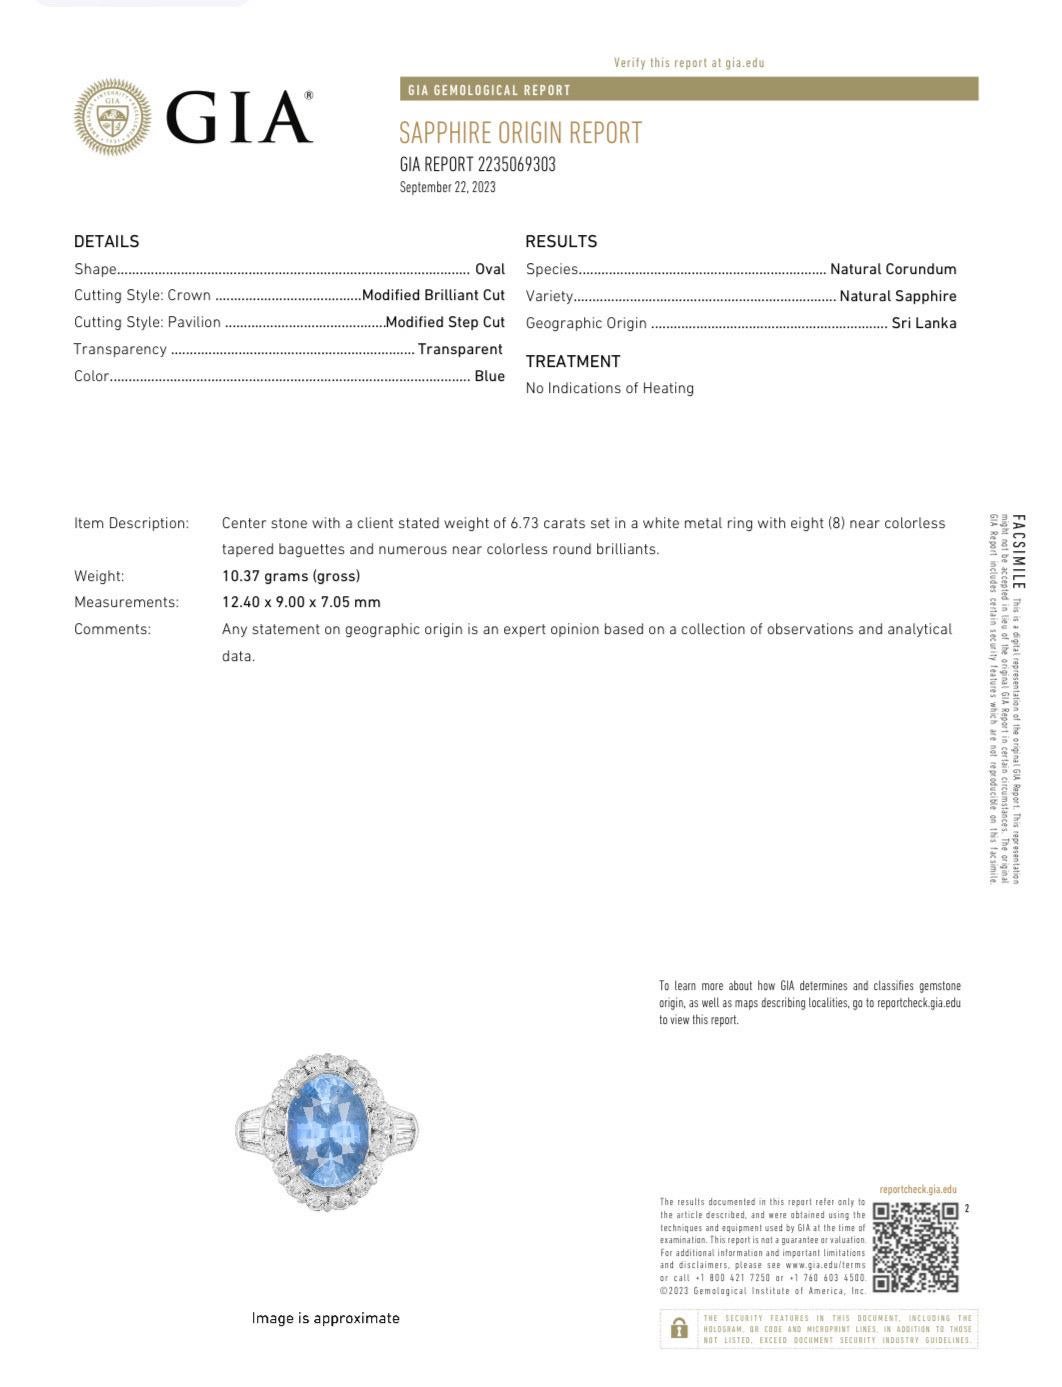 DeKara Designs Collection

Our latest design! An elegant and lustrous Cornflower blue no heat Blue Sapphire surrounded by beautiful diamonds in a halo setting.

Metal- 90% Platinum, 10% Iridium.

Stones- GIA Certified Oval Blue Sapphire 6.73 Carats.